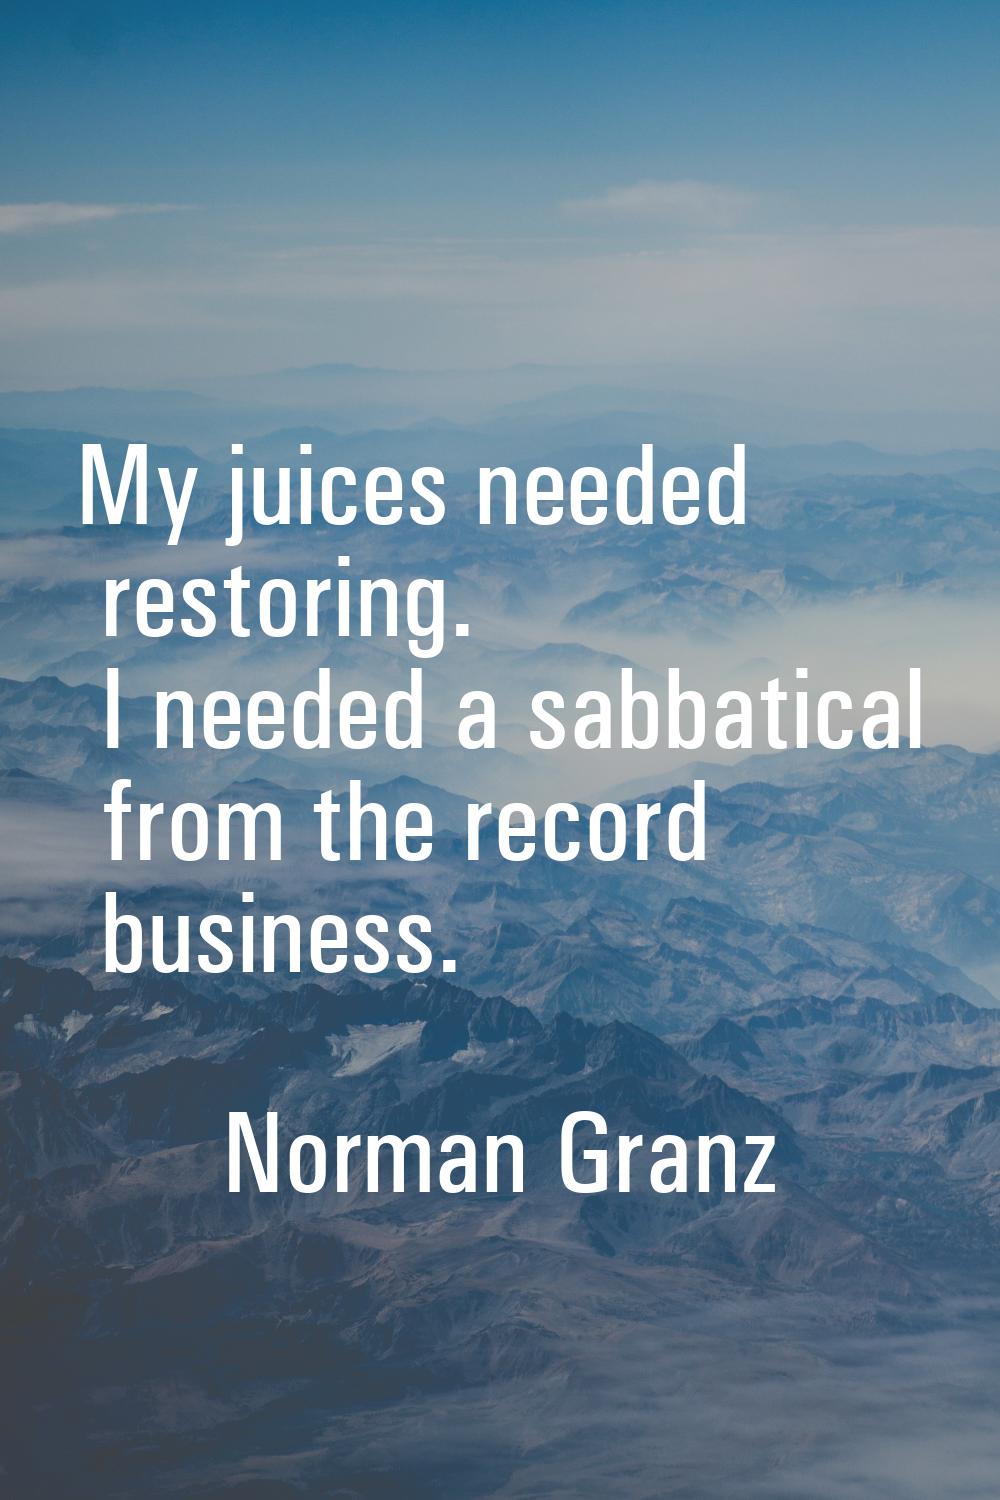 My juices needed restoring. I needed a sabbatical from the record business.